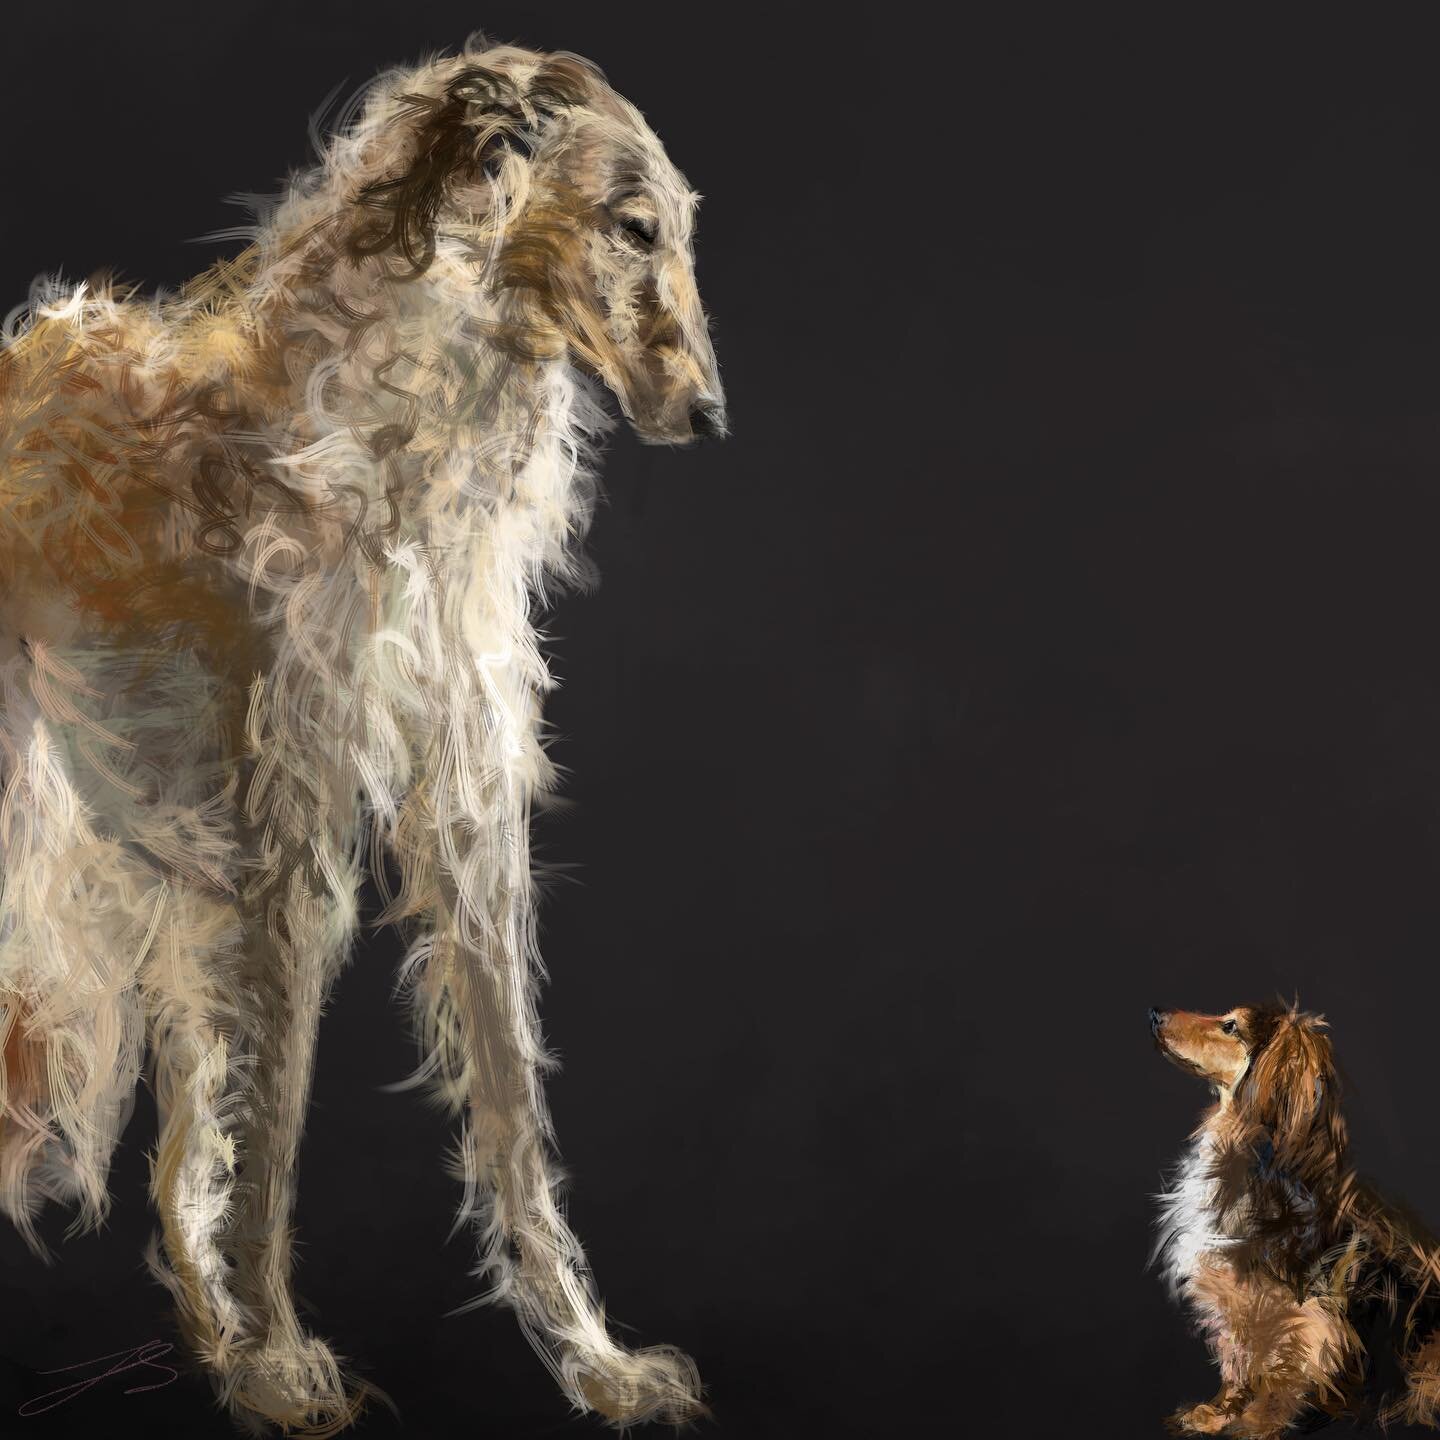 Day 30 of @dogsinaugust is the dachshund
And day 31 is the borzoi

I did it! 
It&rsquo;s definitely no longer august&hellip;but it&rsquo;s been great to be able to persevere, finish them all, and it helps that I really like this one. 

#artyismymiddl